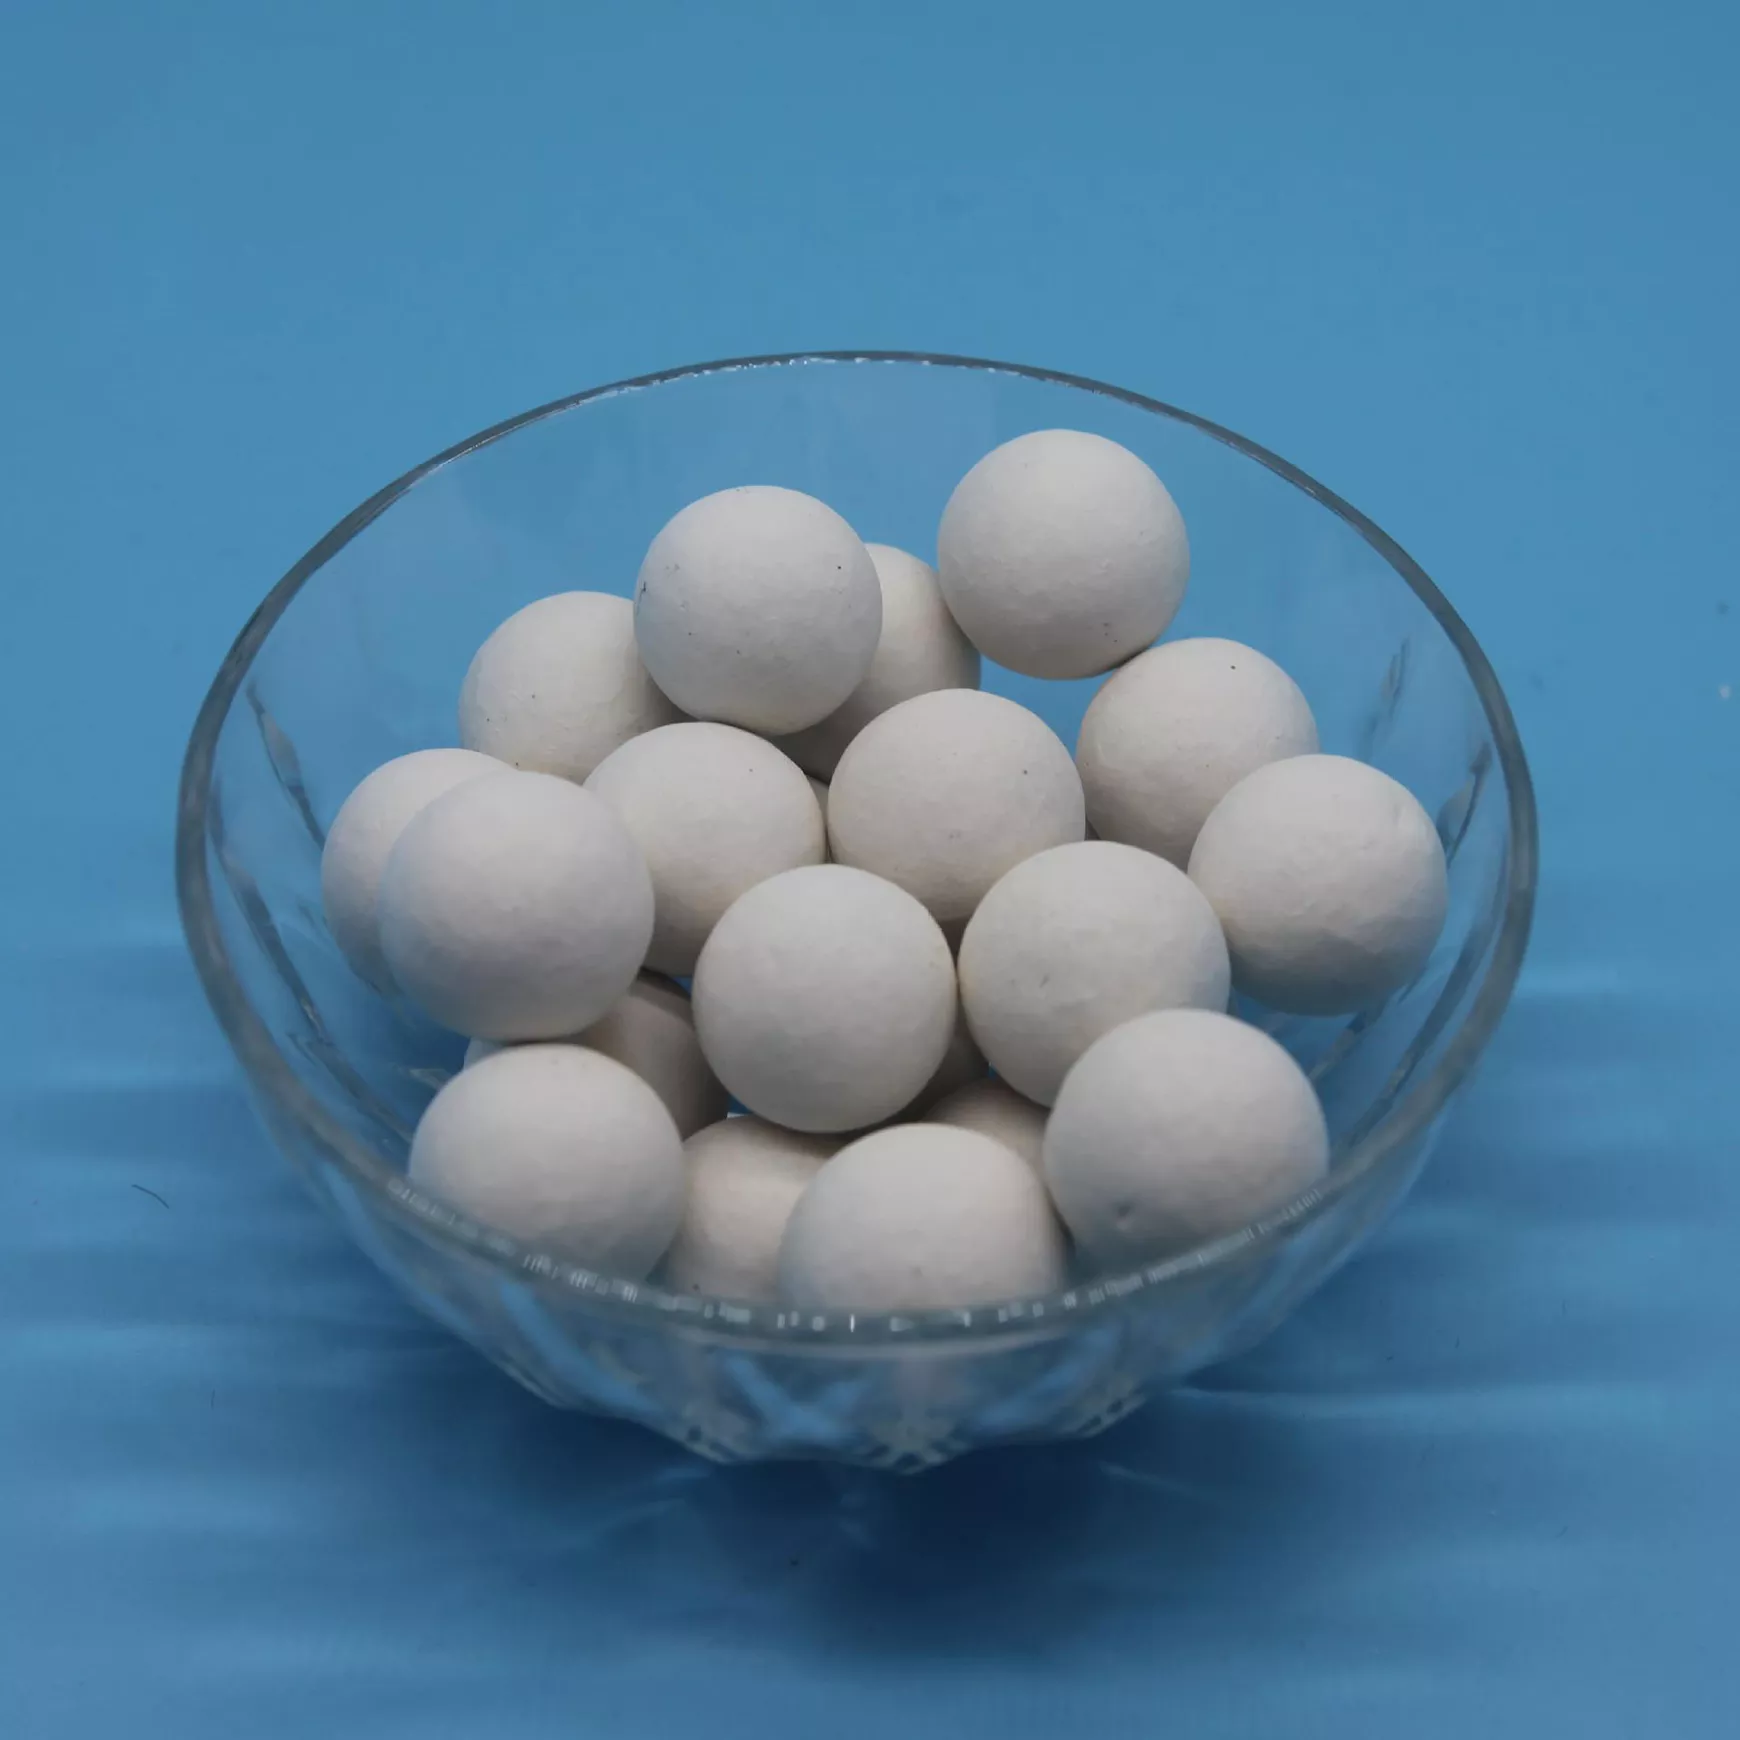 How do Ceramic Alumina Balls Affect the Particle Size Distribution in a Grinding Process?